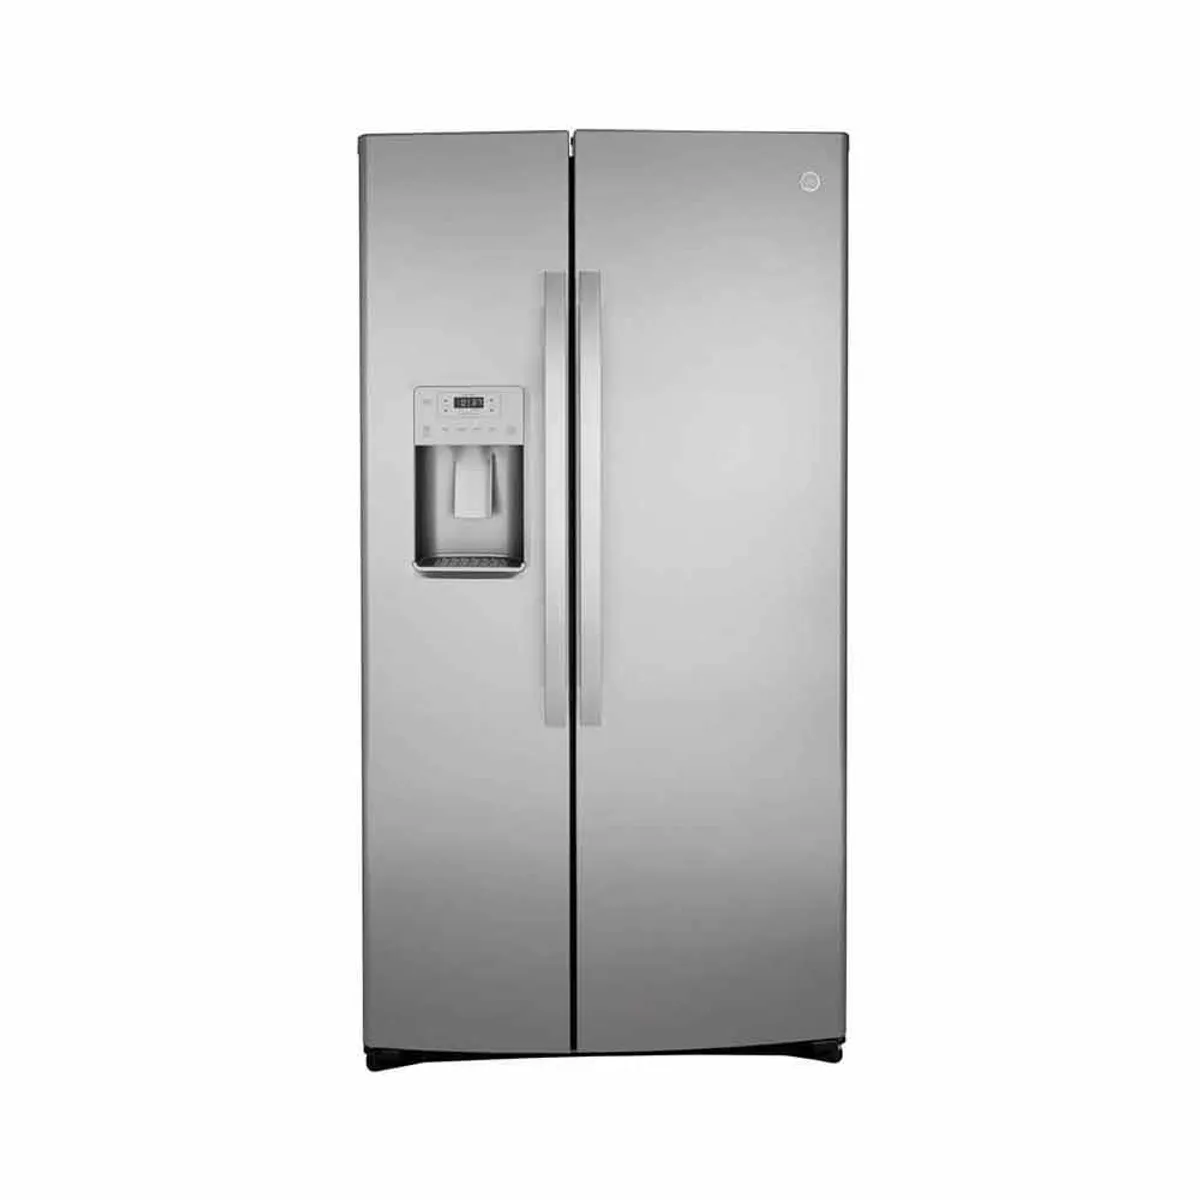 GE GZS22IYNFS 21.8 Cu.Ft. Stainless Counter Depth Side-by-Side Refrigerator